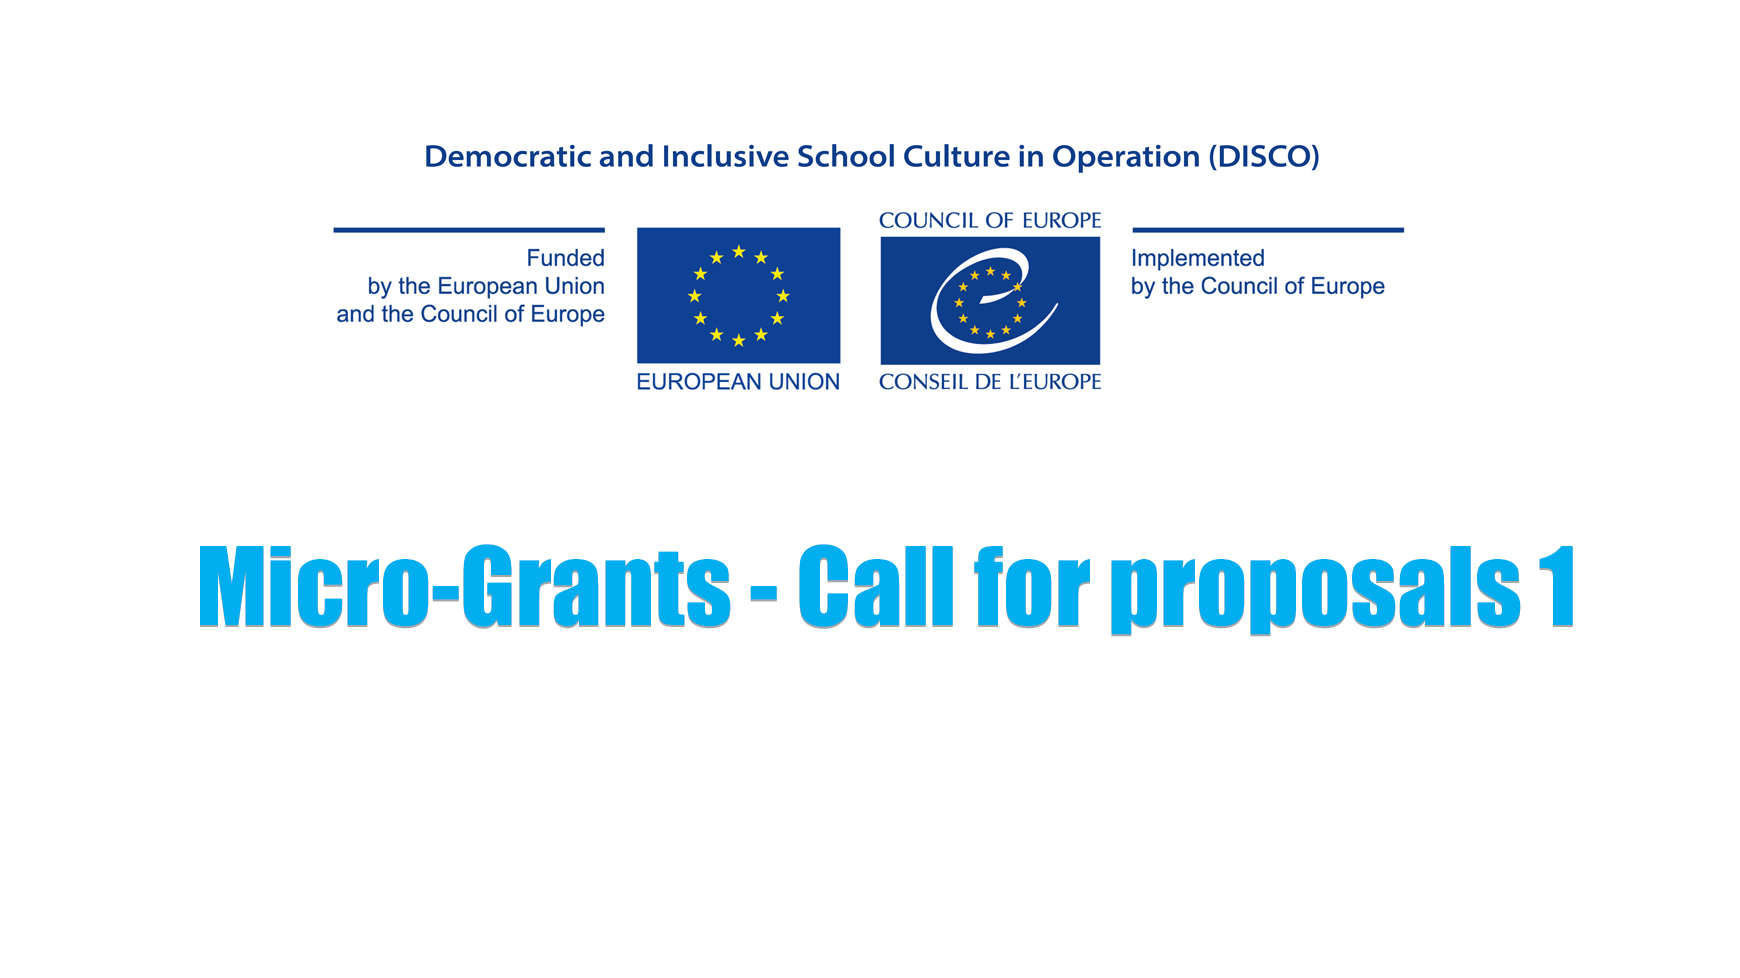 Results of the call for proposals for micro-grants